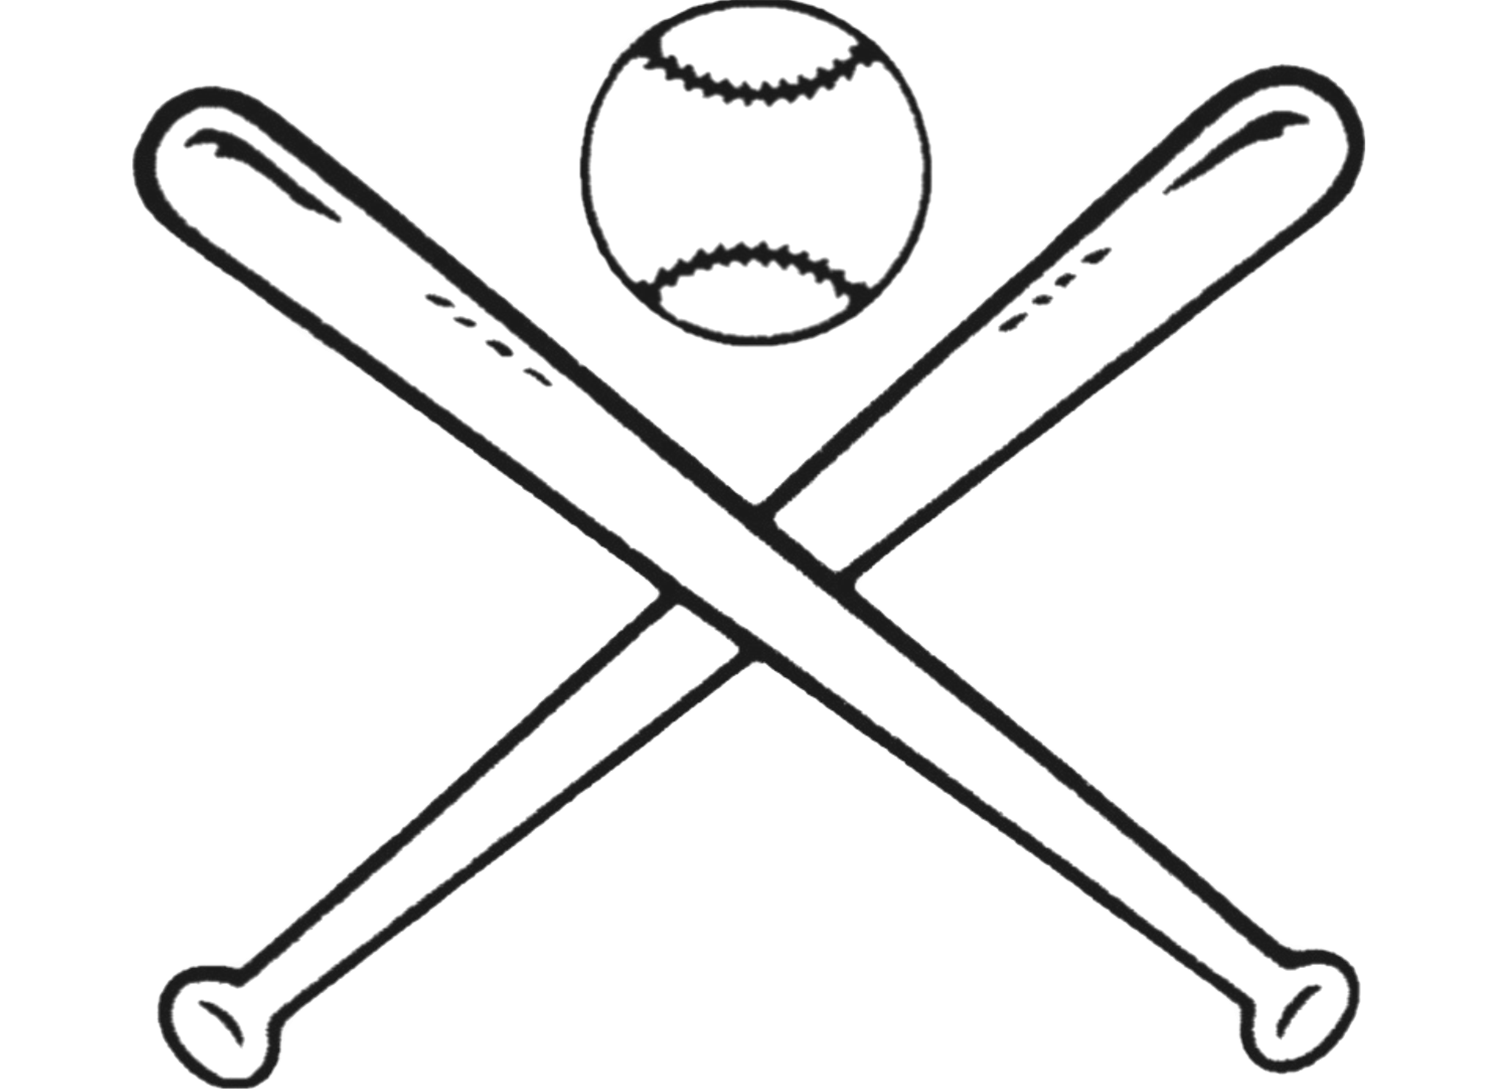 Baseball  black and white black and white baseball clipart cliparts others art inspiration 2